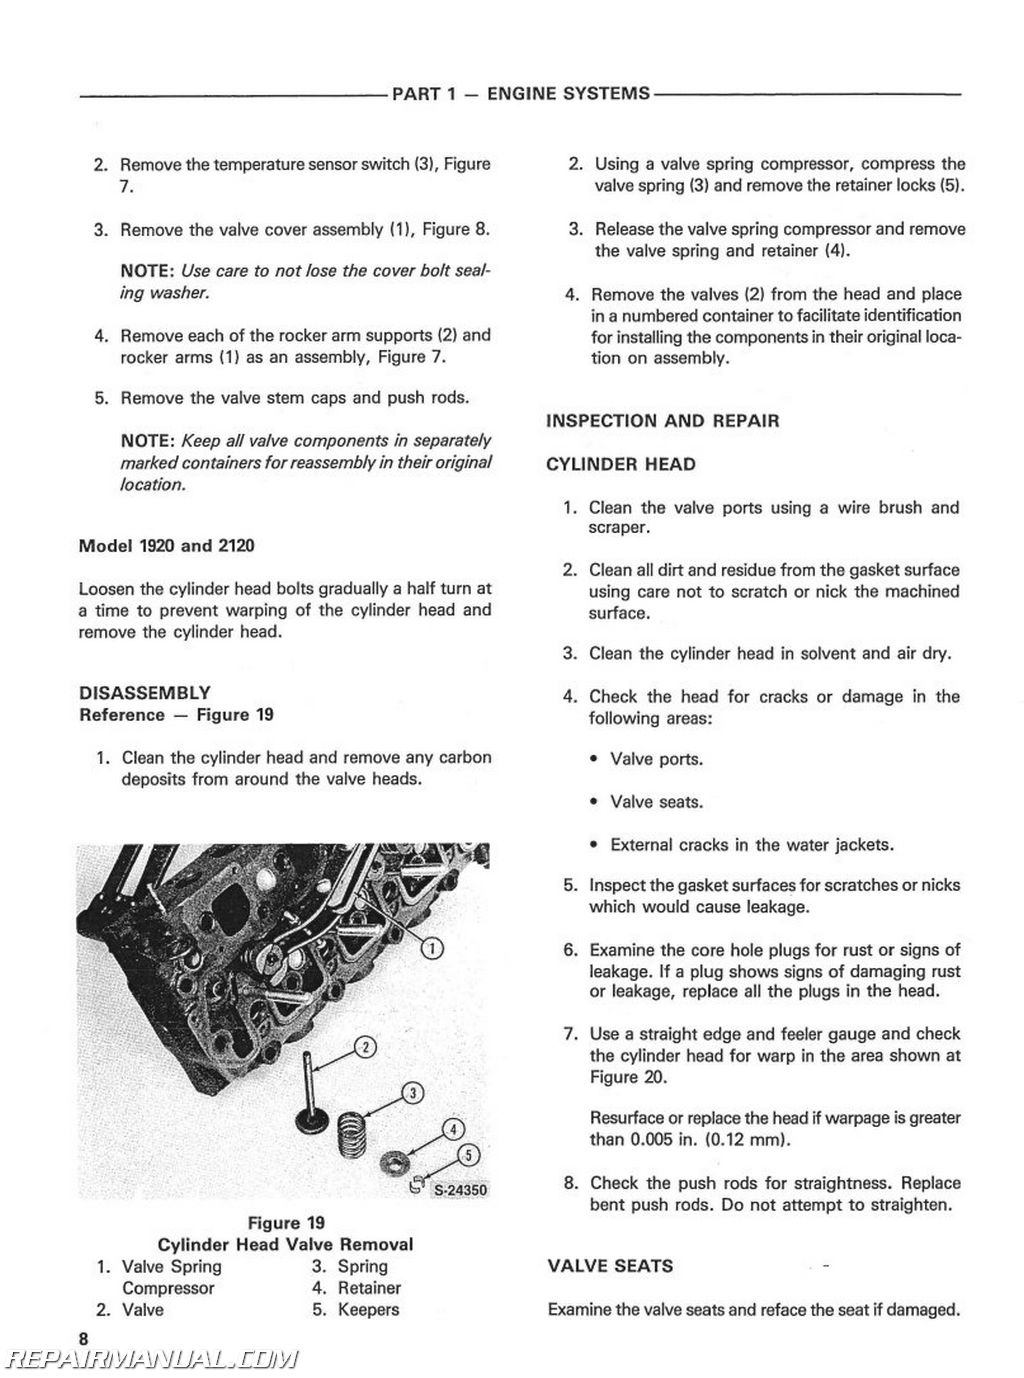 Ford 2120 service manual #9